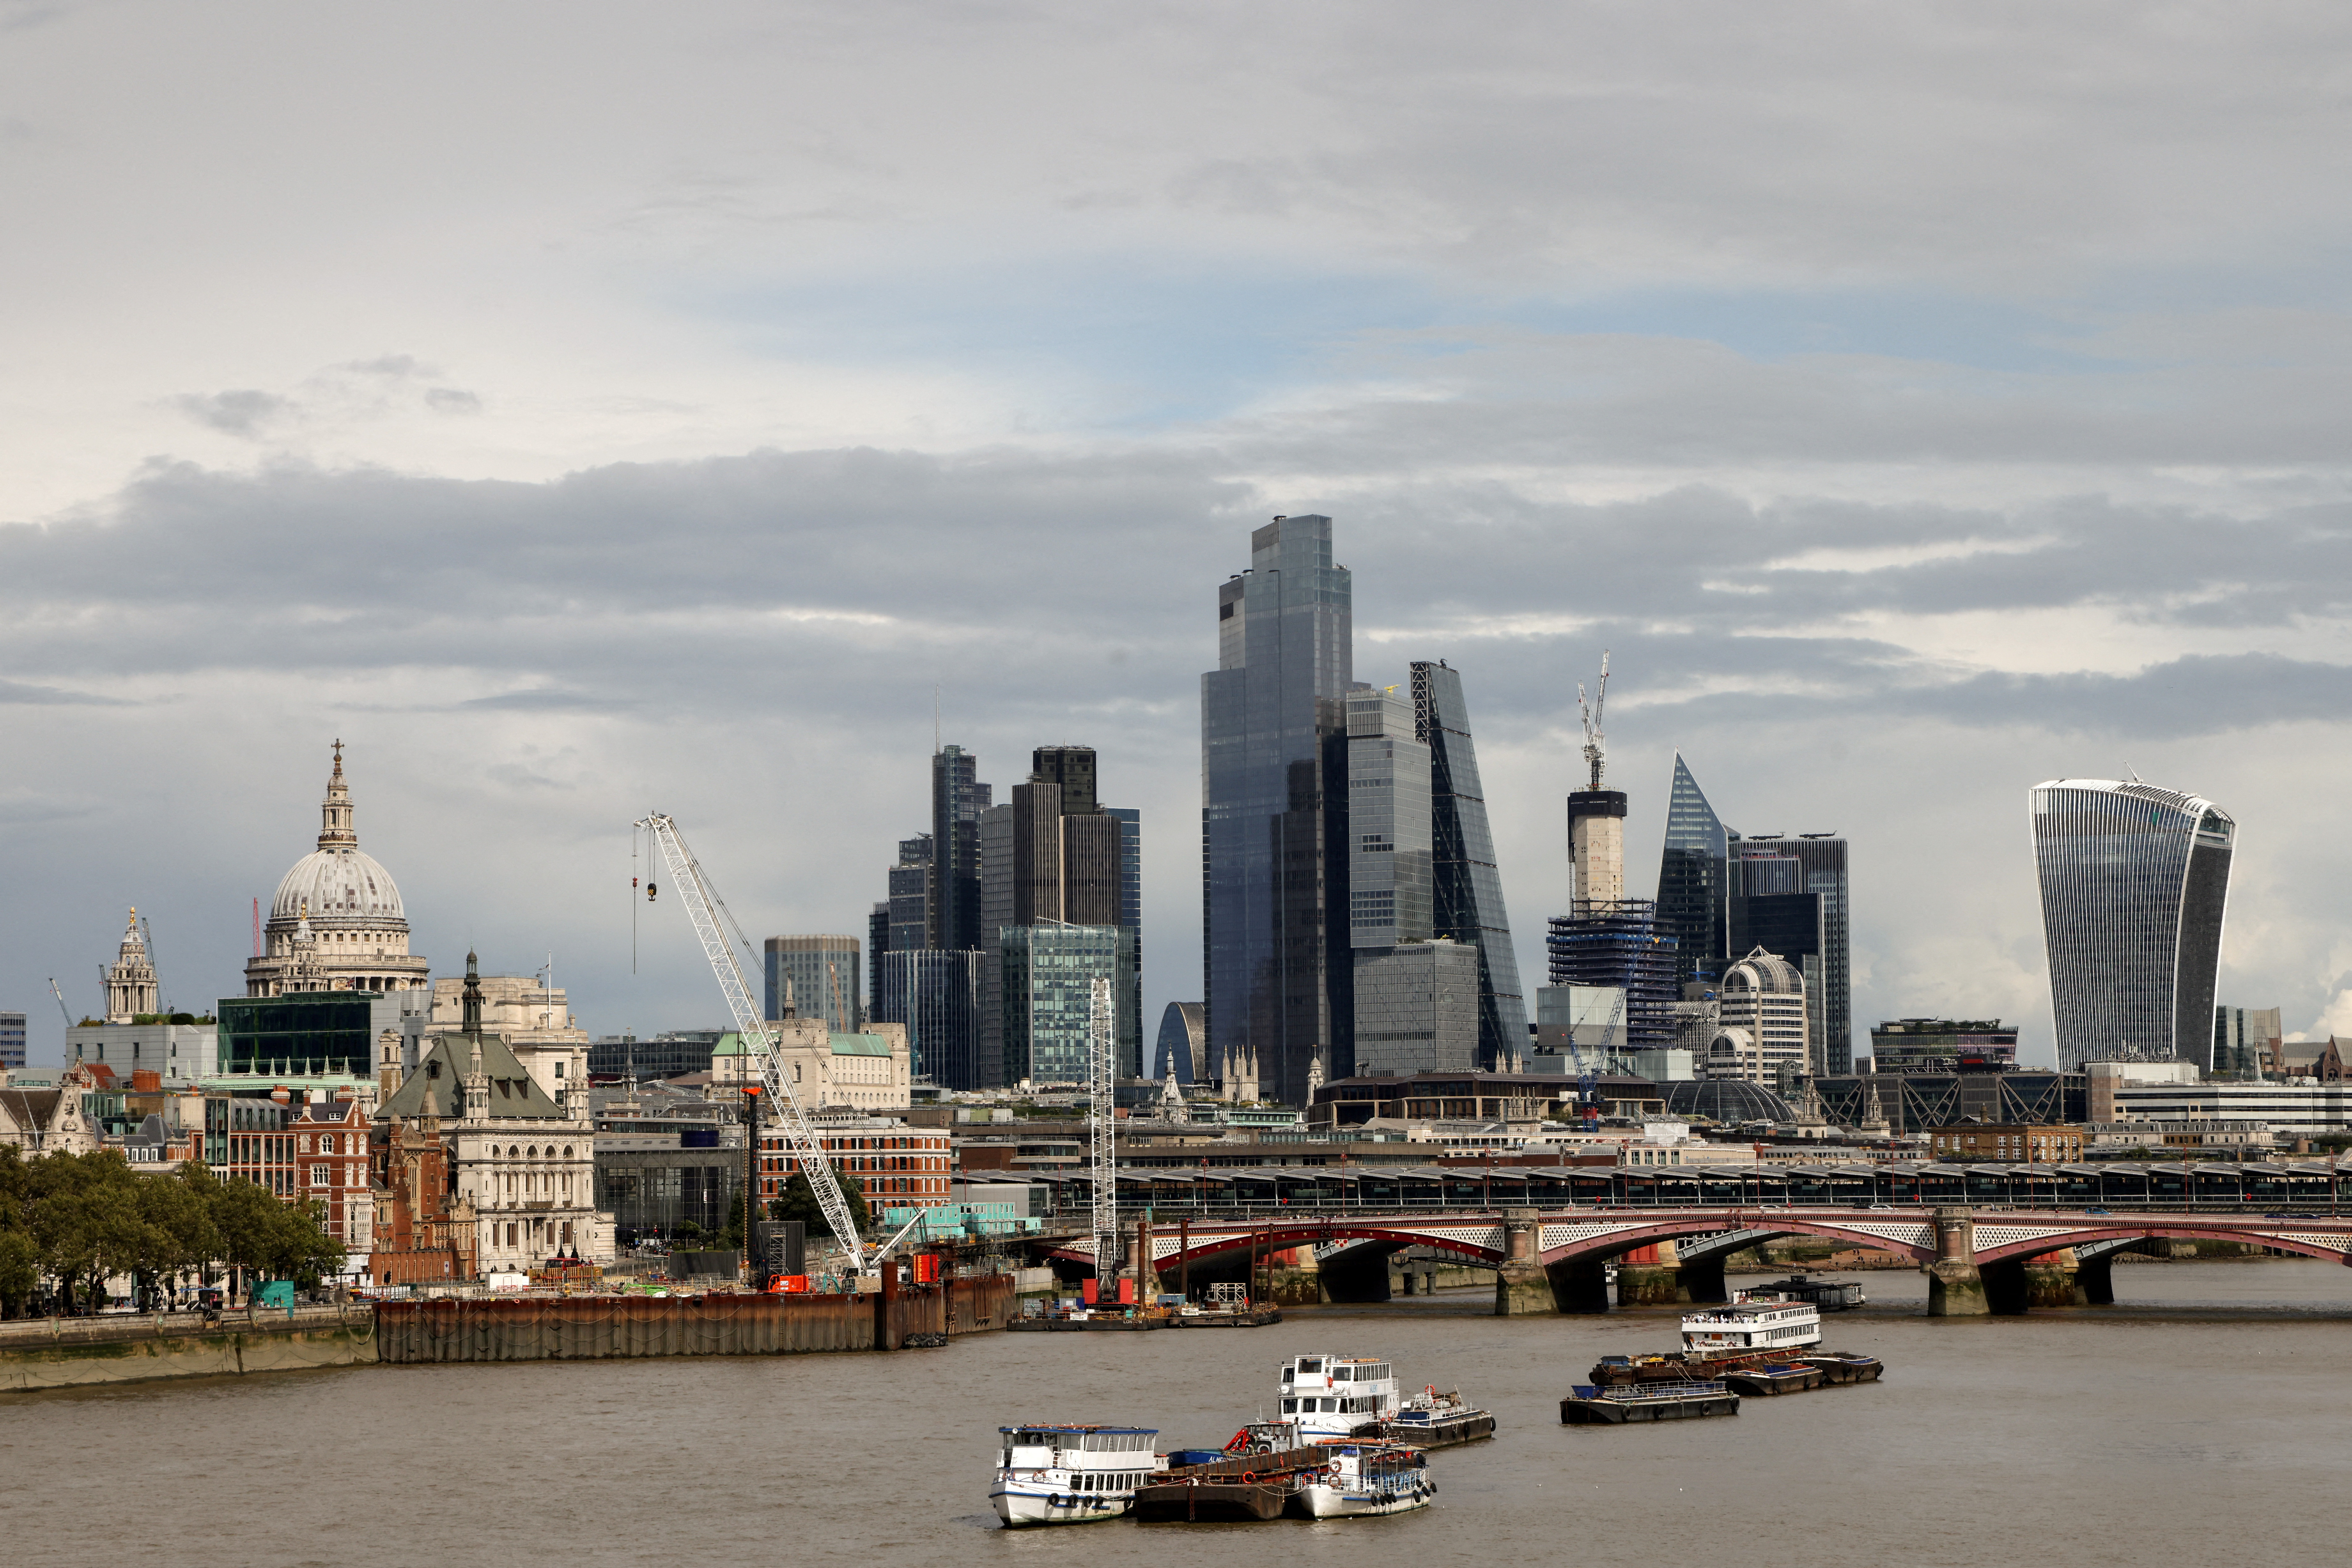 A view of the London financial district seen from Waterloo Bridge in London